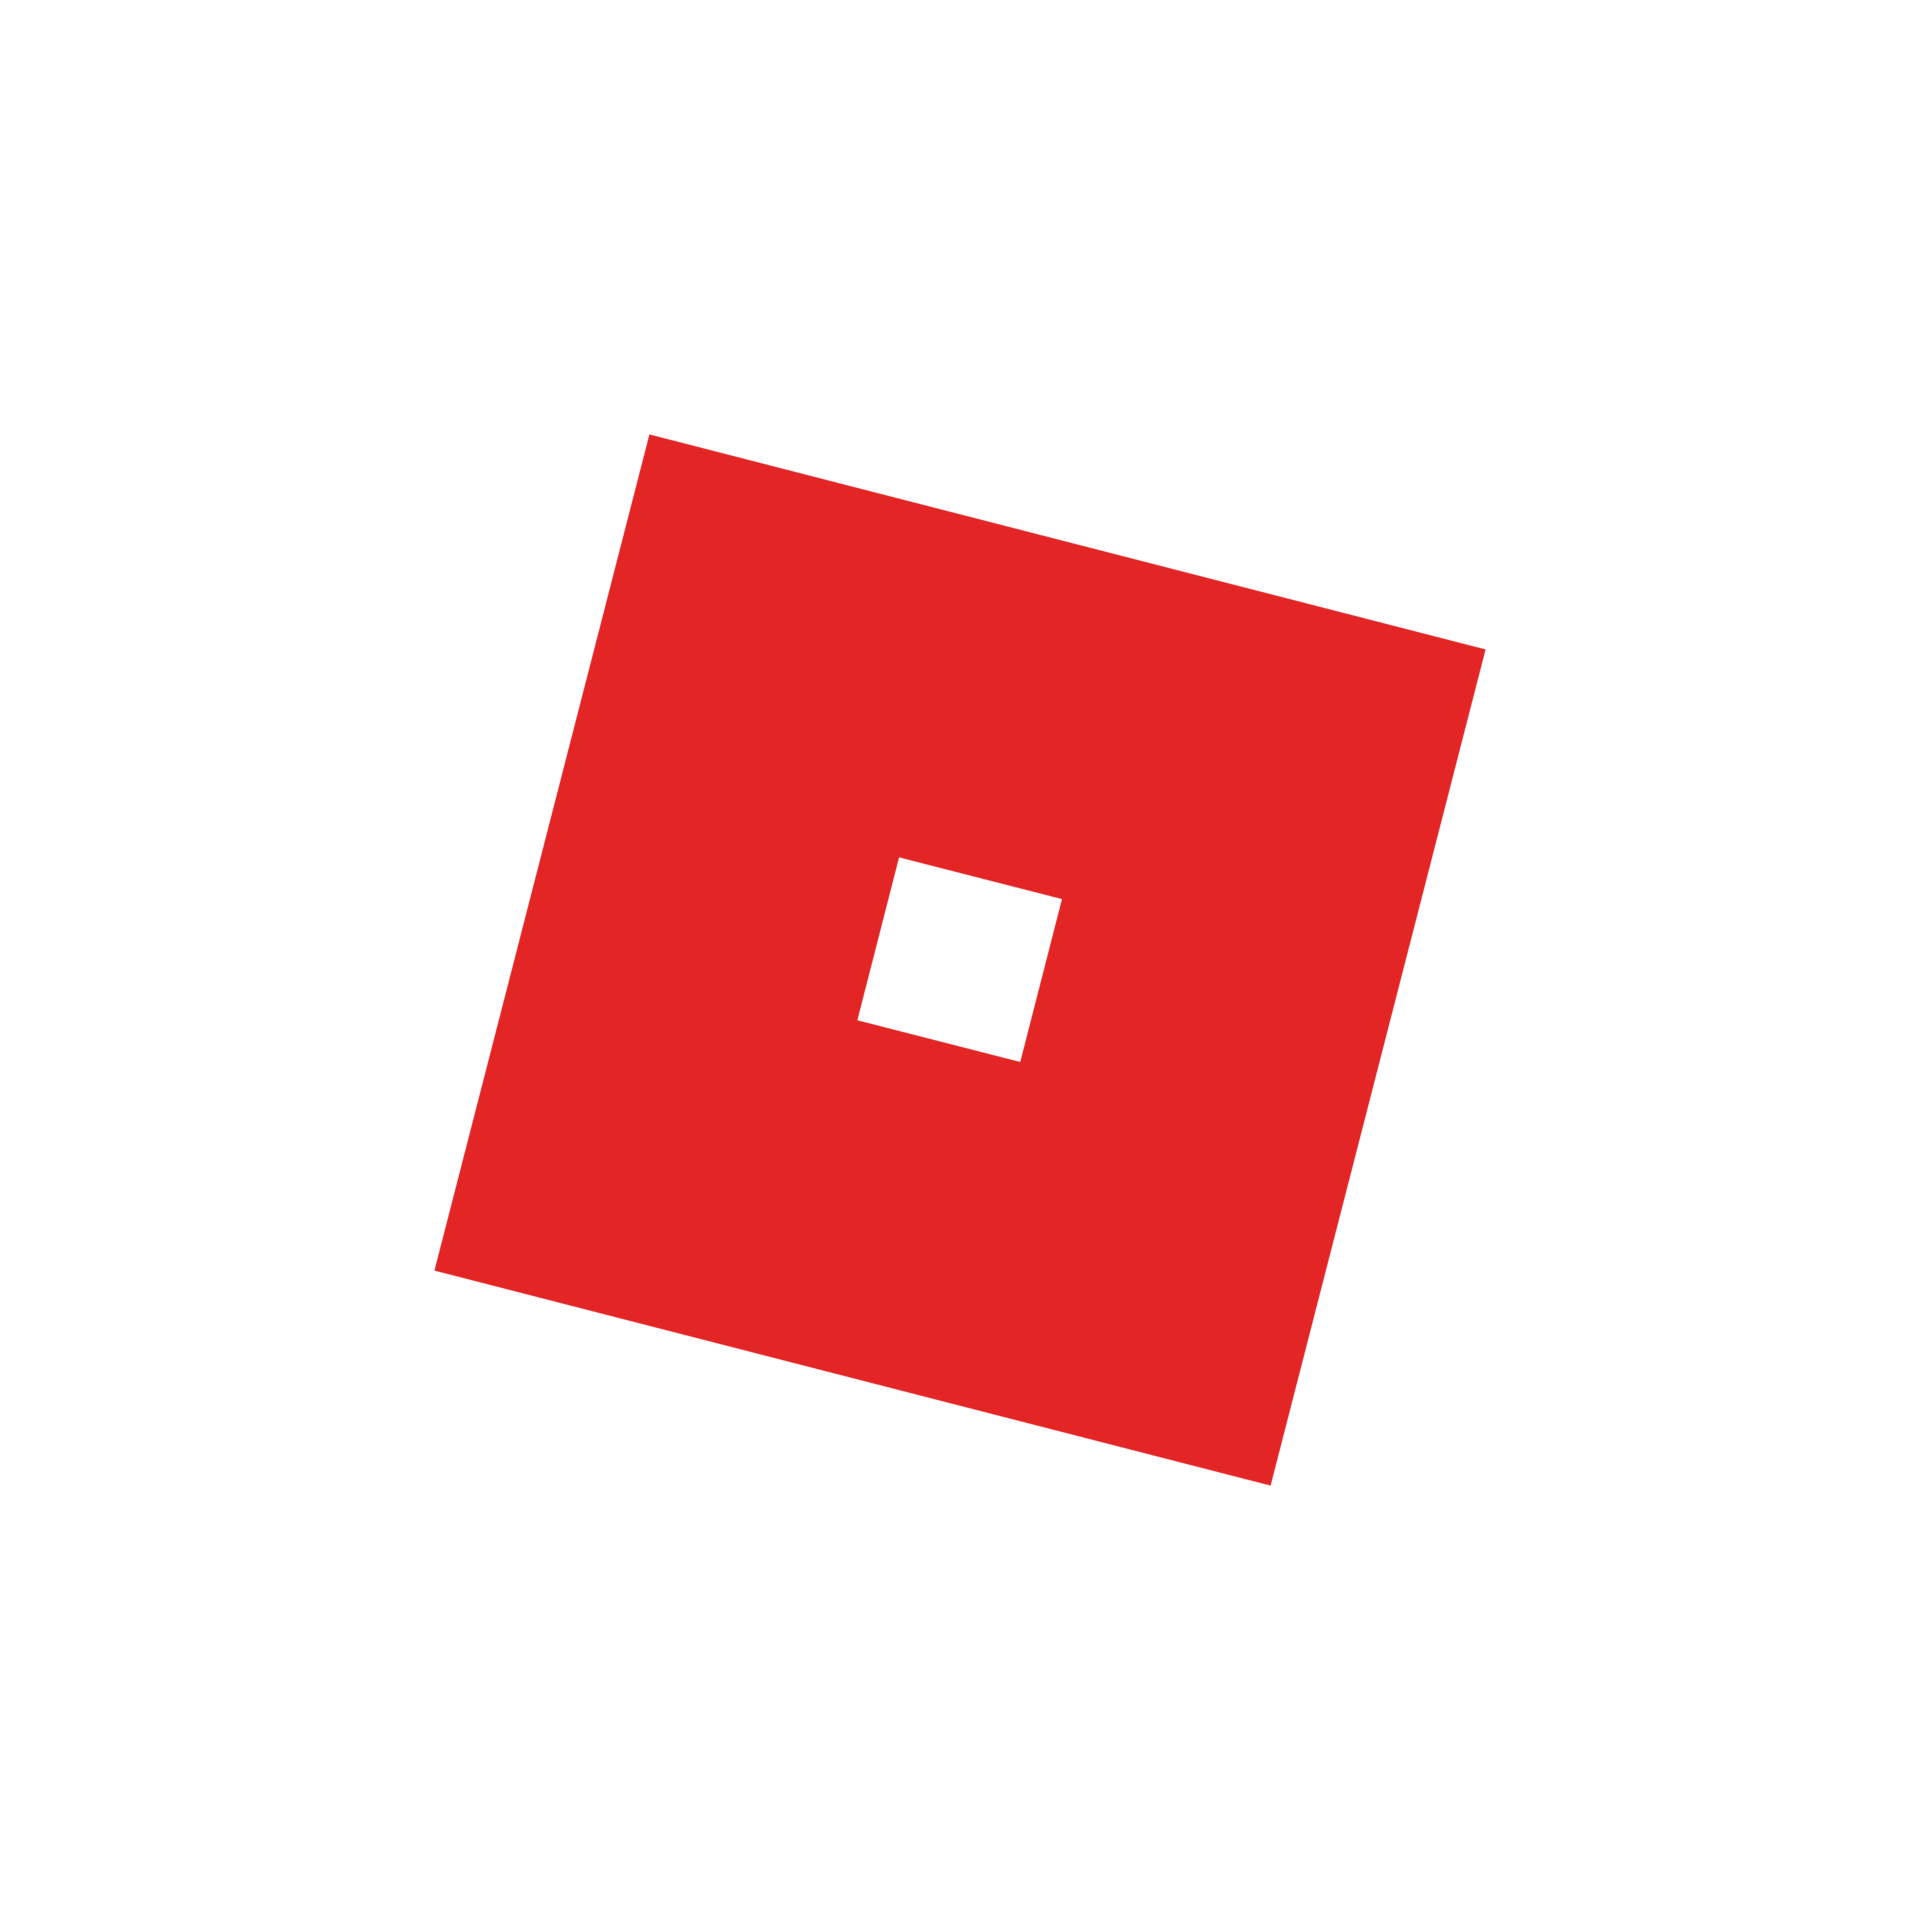 Transparent Background Roblox Logo Png, Png Download is free